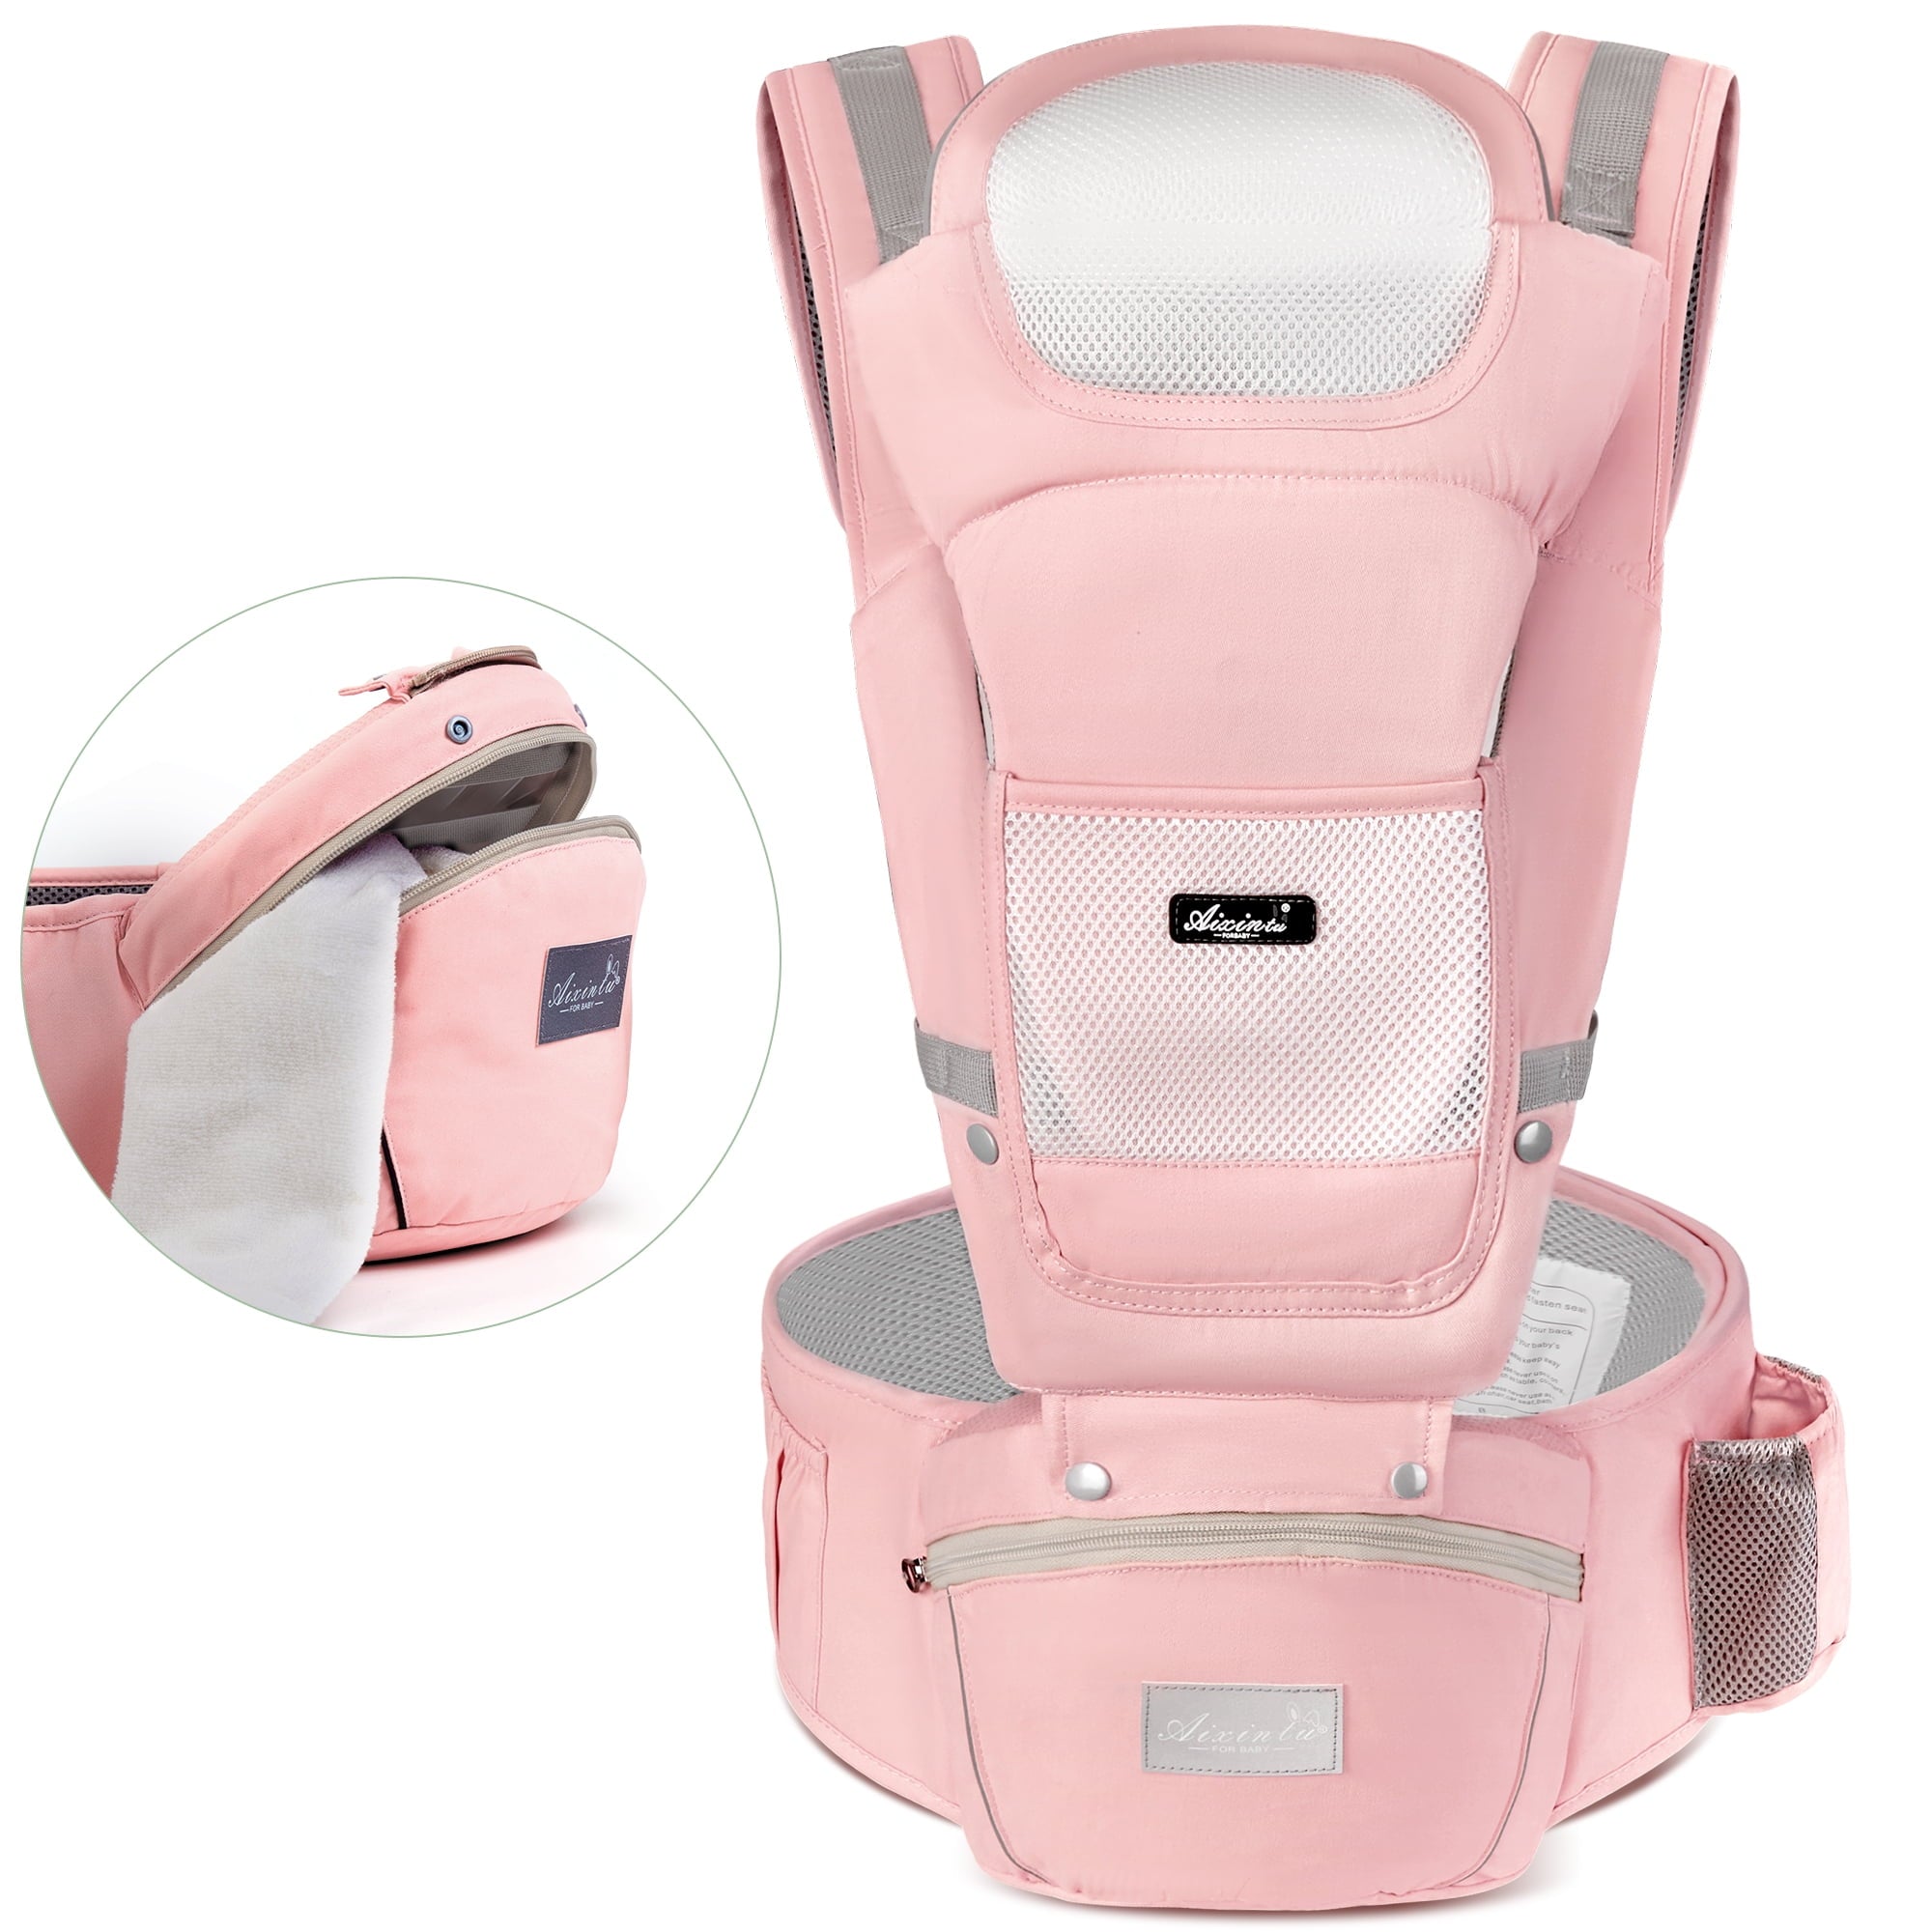 Vbiger Baby Carrier 6-in-1 with Hip Seat, Head Support and Breathable Mesh, Adjustable Removable Soft Ergonomic Baby Sling Carrier, Pink